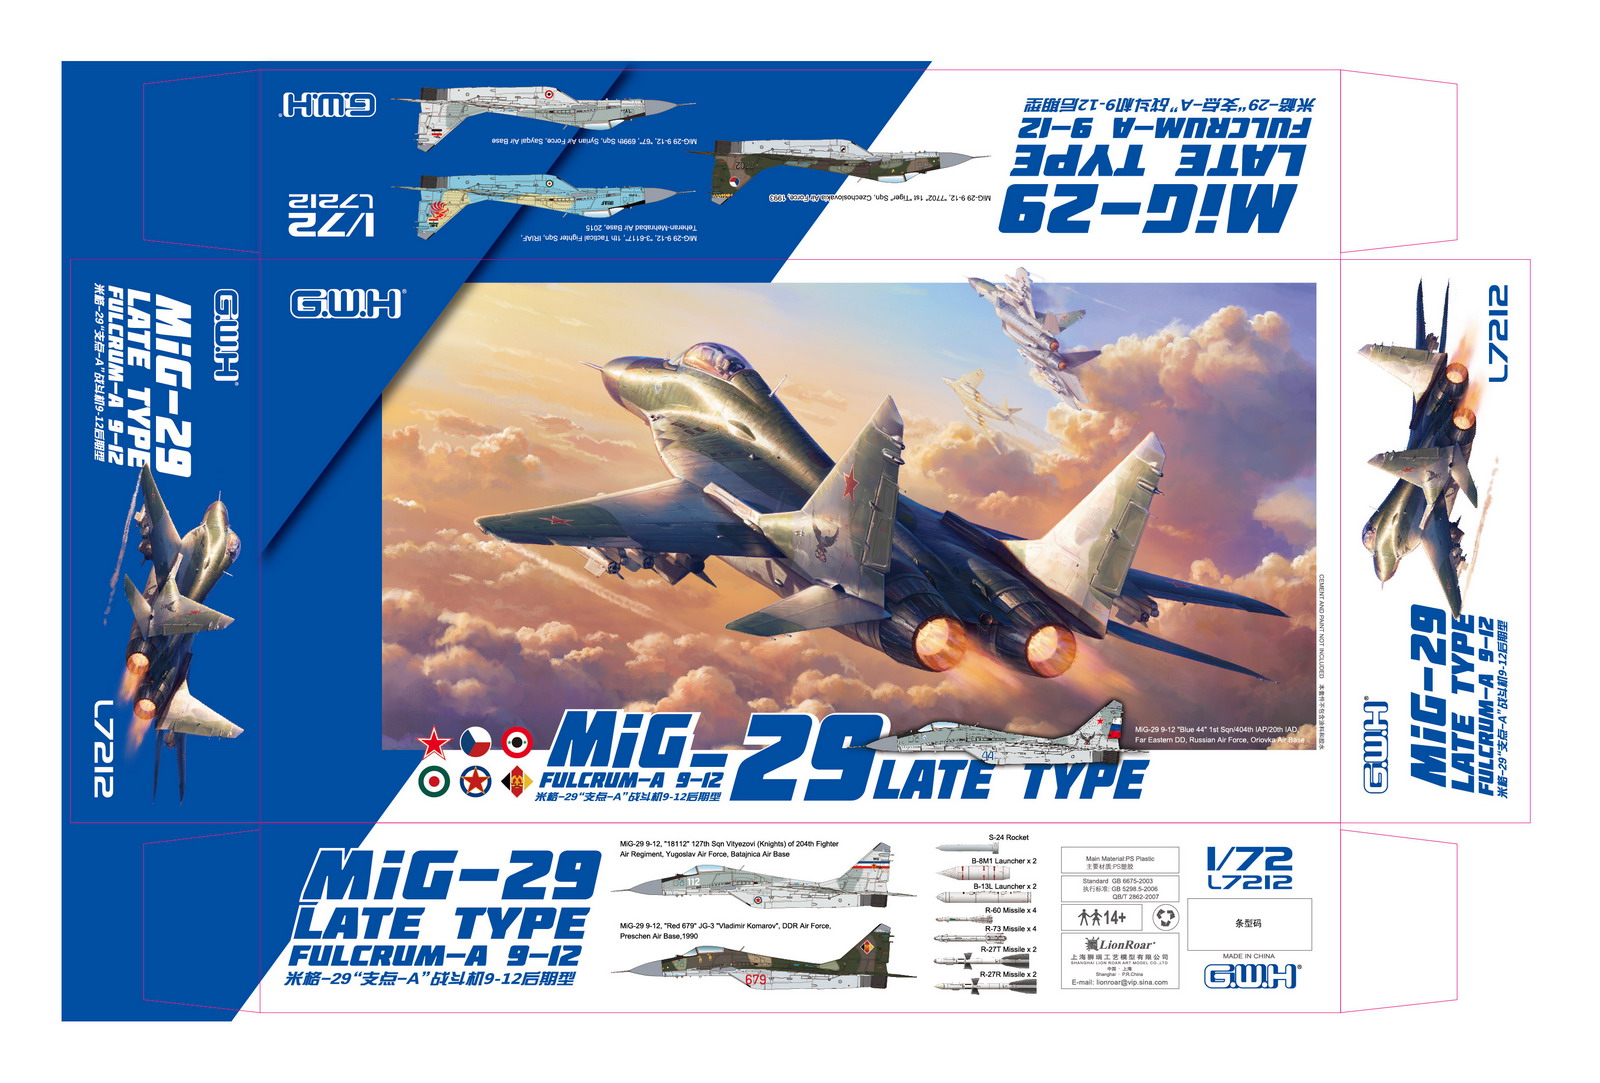 1/72 MiG-29 late type 9-12 Fulcrum-A